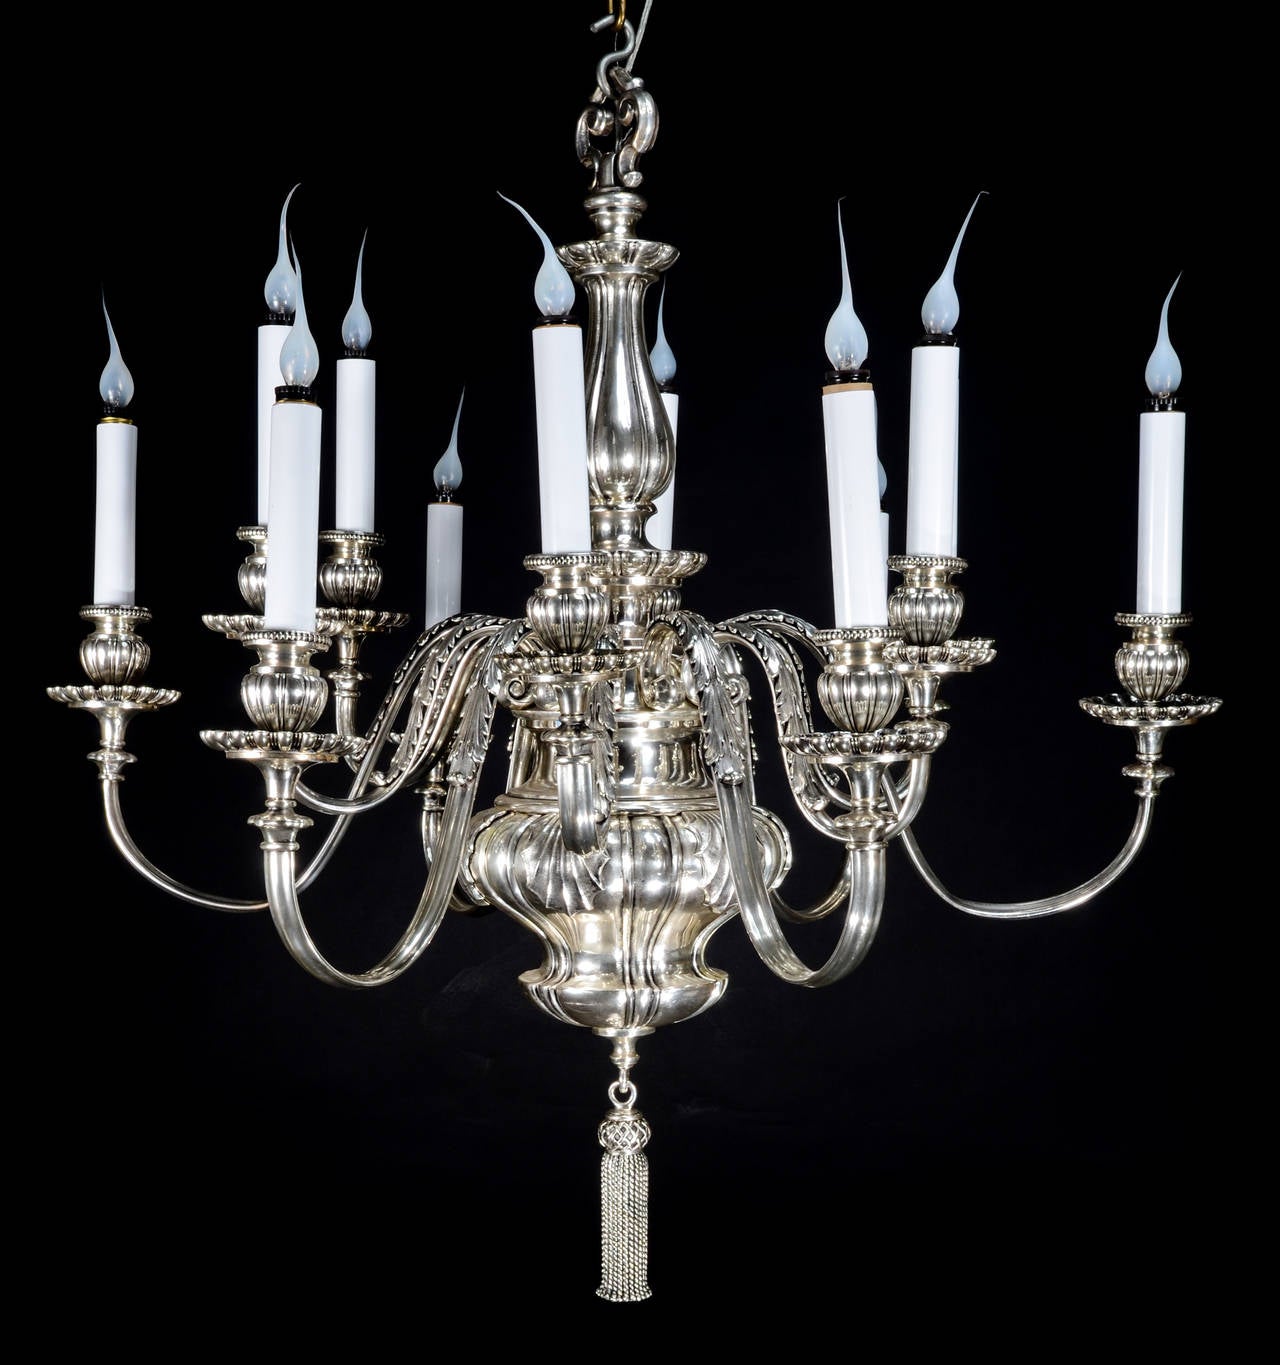 A pair of large antique American silvered bronze double-tier Georgian style multi-light chandeliers by E. F. Caldwell, New York.